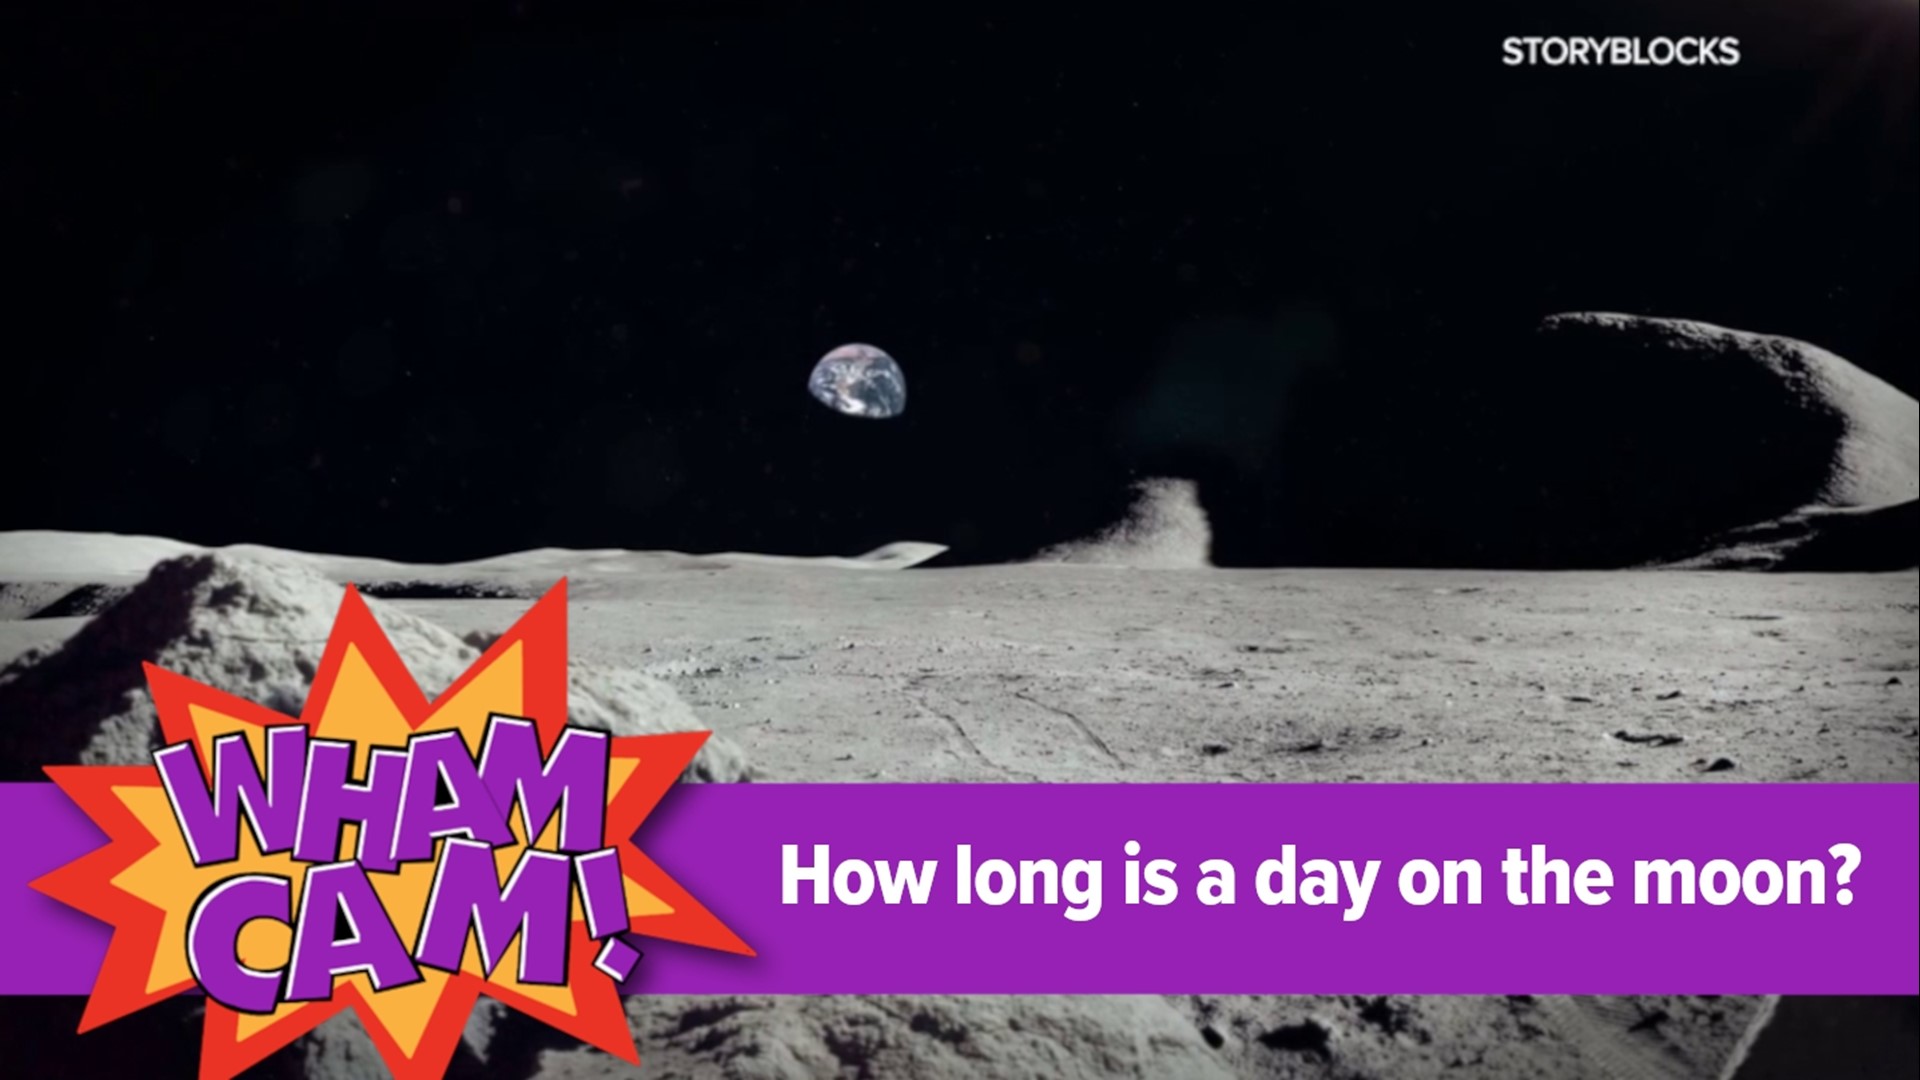 With the Artemis mission big the news, Joe's thinking about the moon. In this week's Wham Cam, he wants to know how long a day is on the moon.